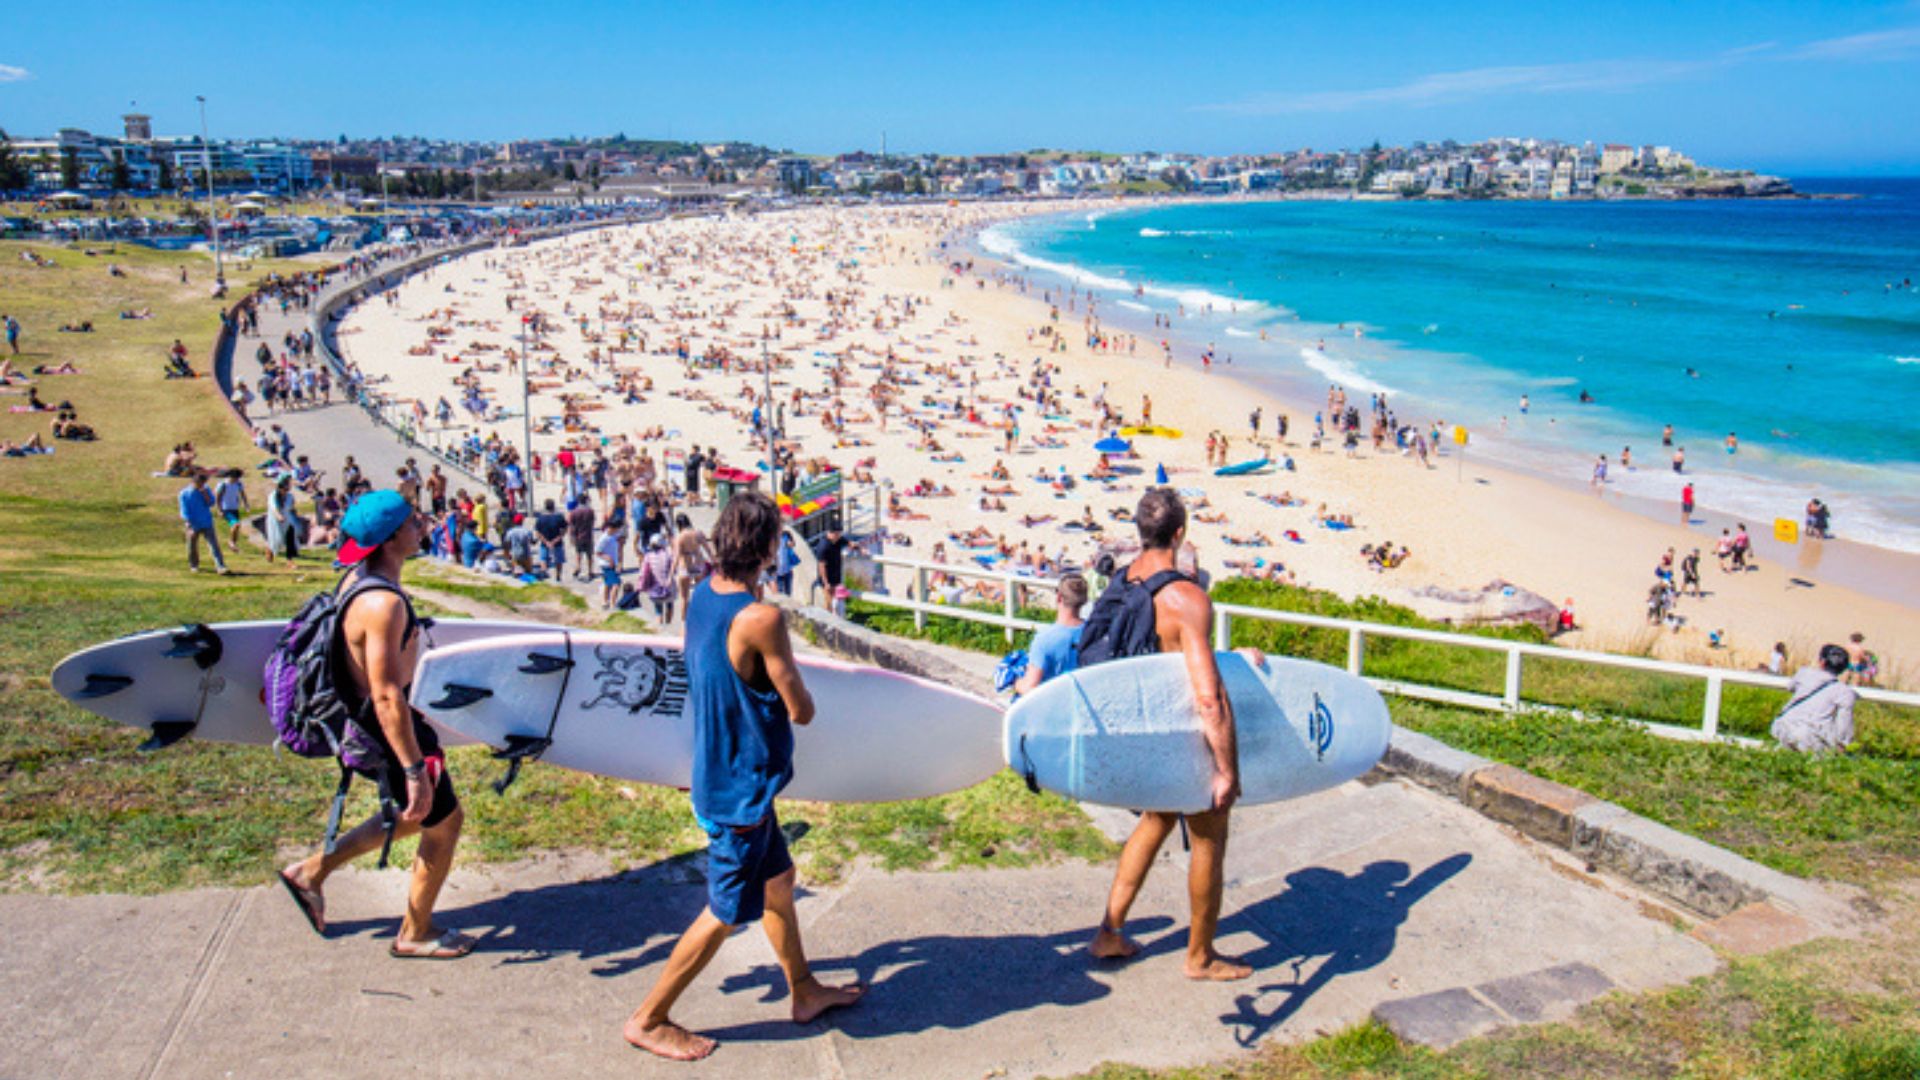 Bondi Beach is one of Australia's most famous and popular beaches